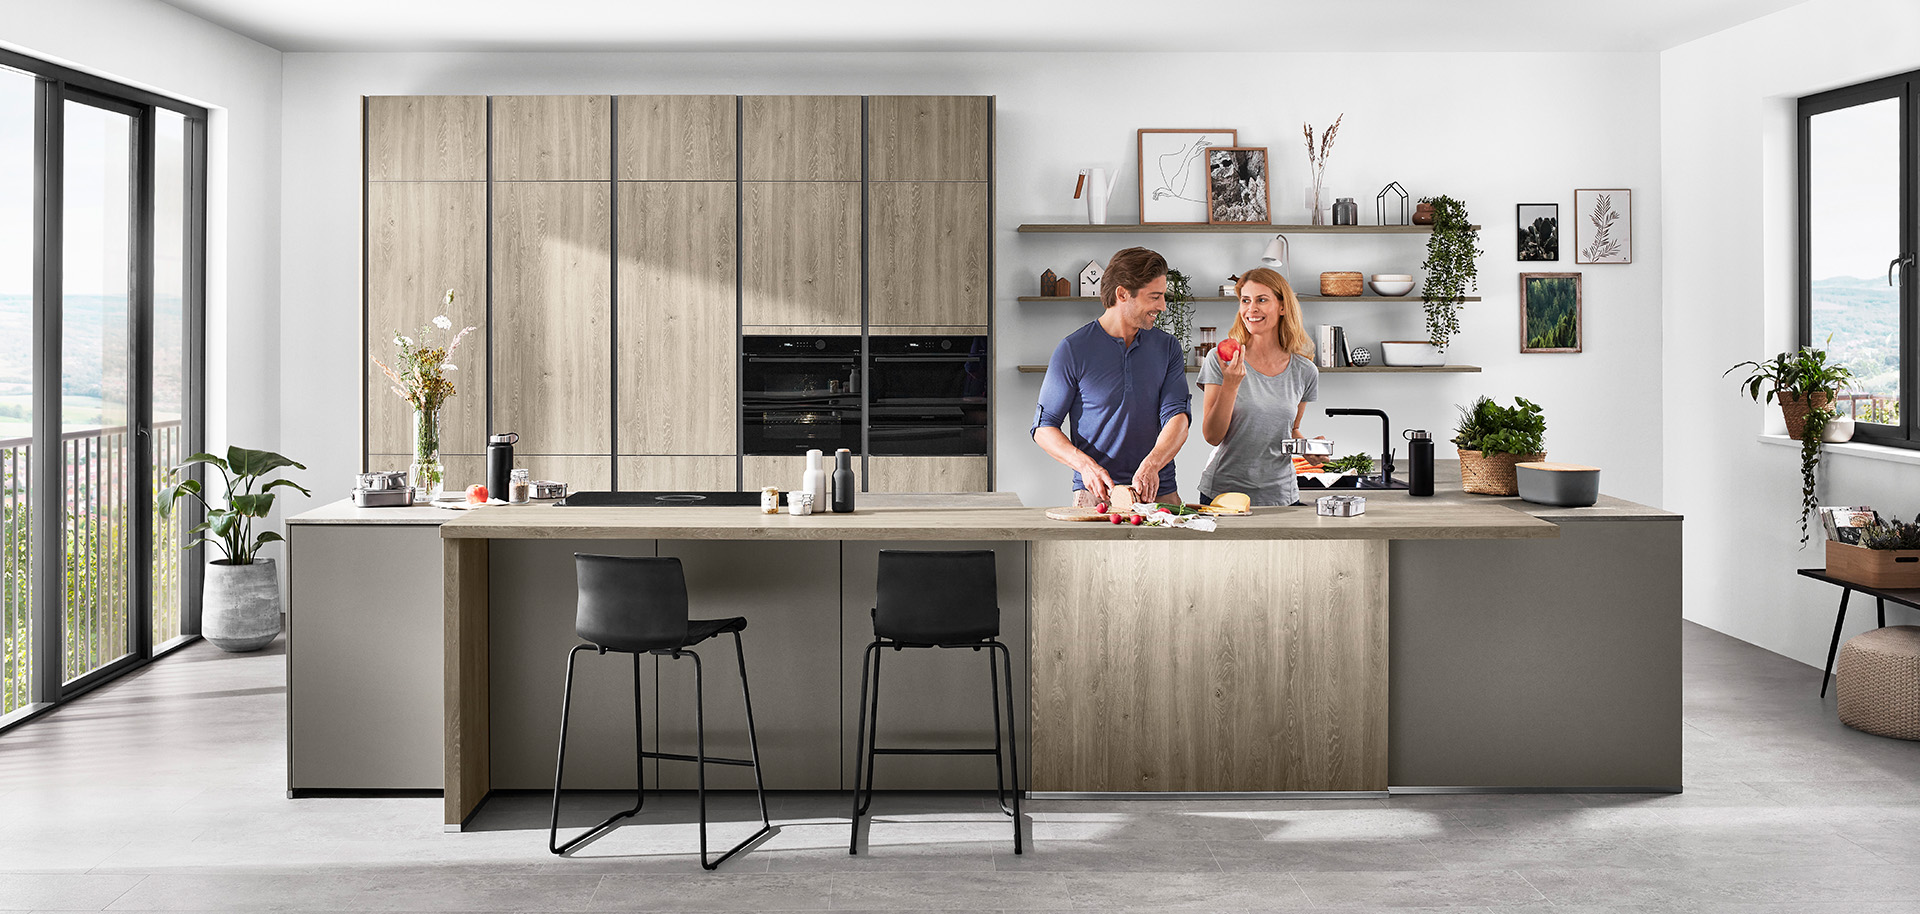 A modern kitchen with a couple preparing food together, featuring sleek cabinetry, integrated appliances, and an island with bar stools overlooking a scenic view.